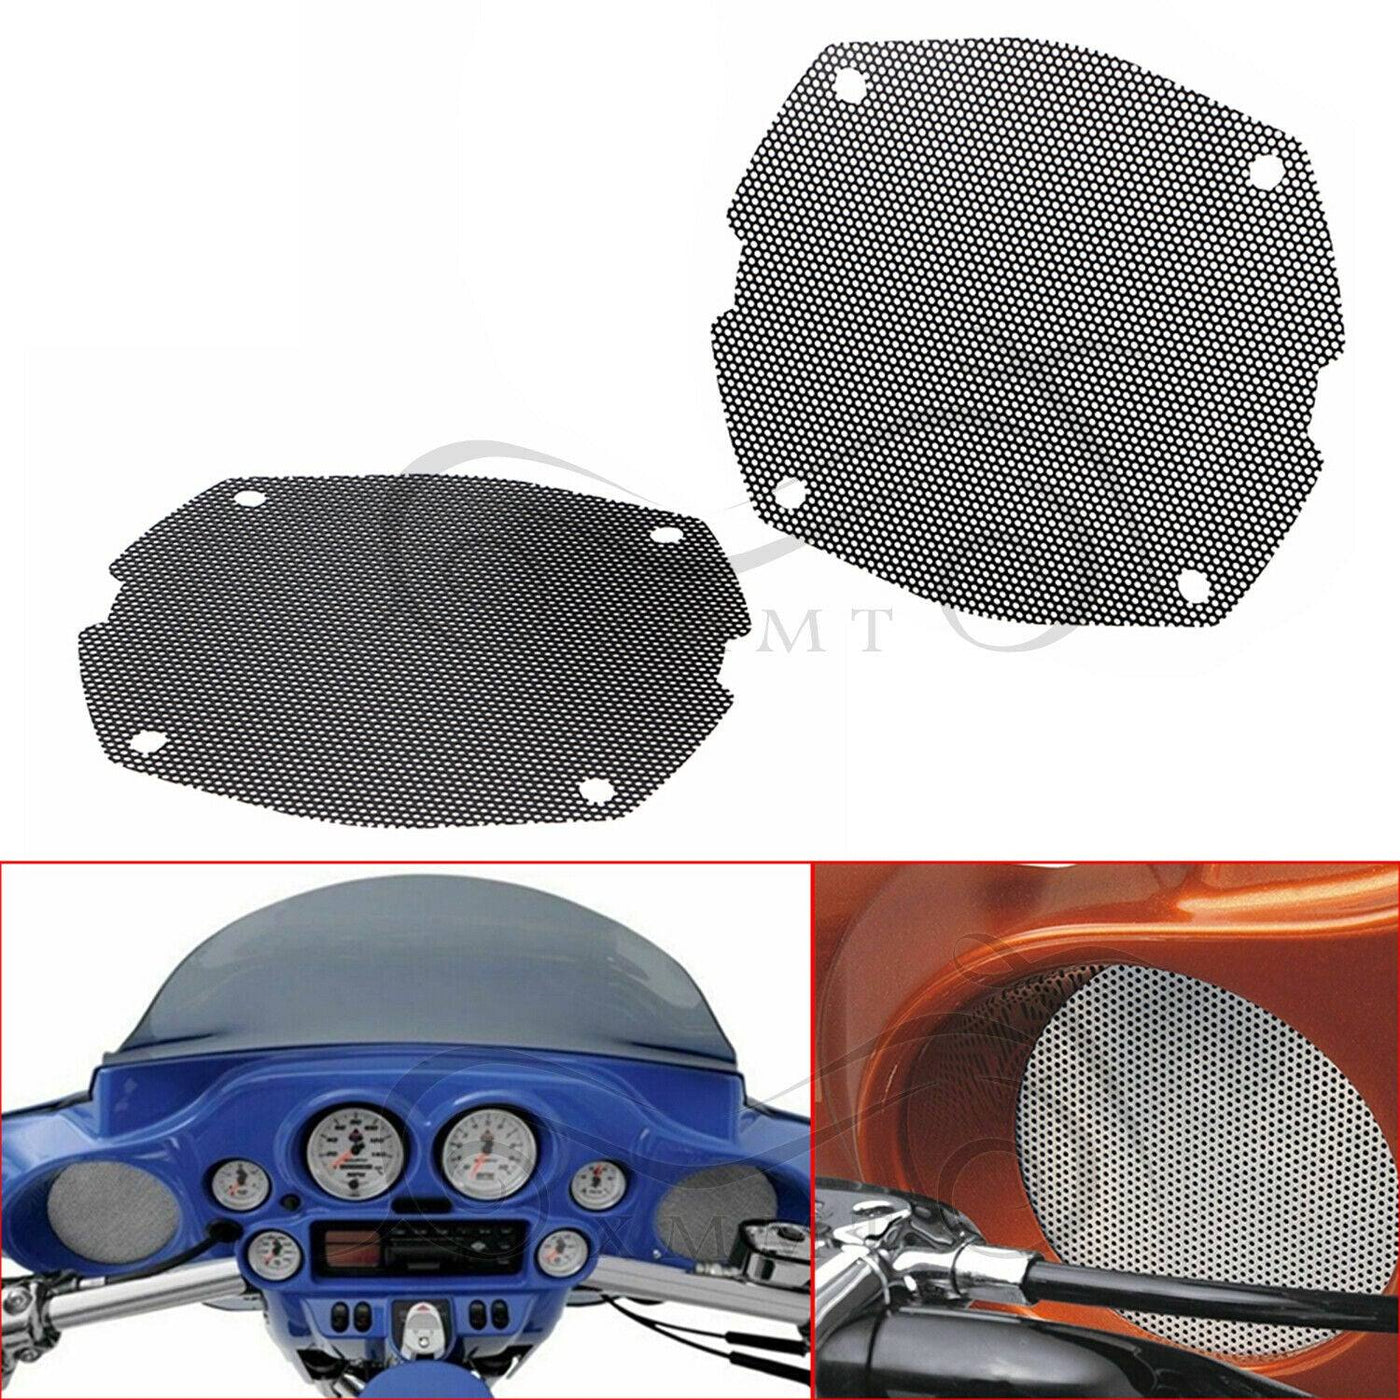 Black Mesh Front Fairing Speaker Grill Grilles Covers For Harley Touring Batwing - Moto Life Products